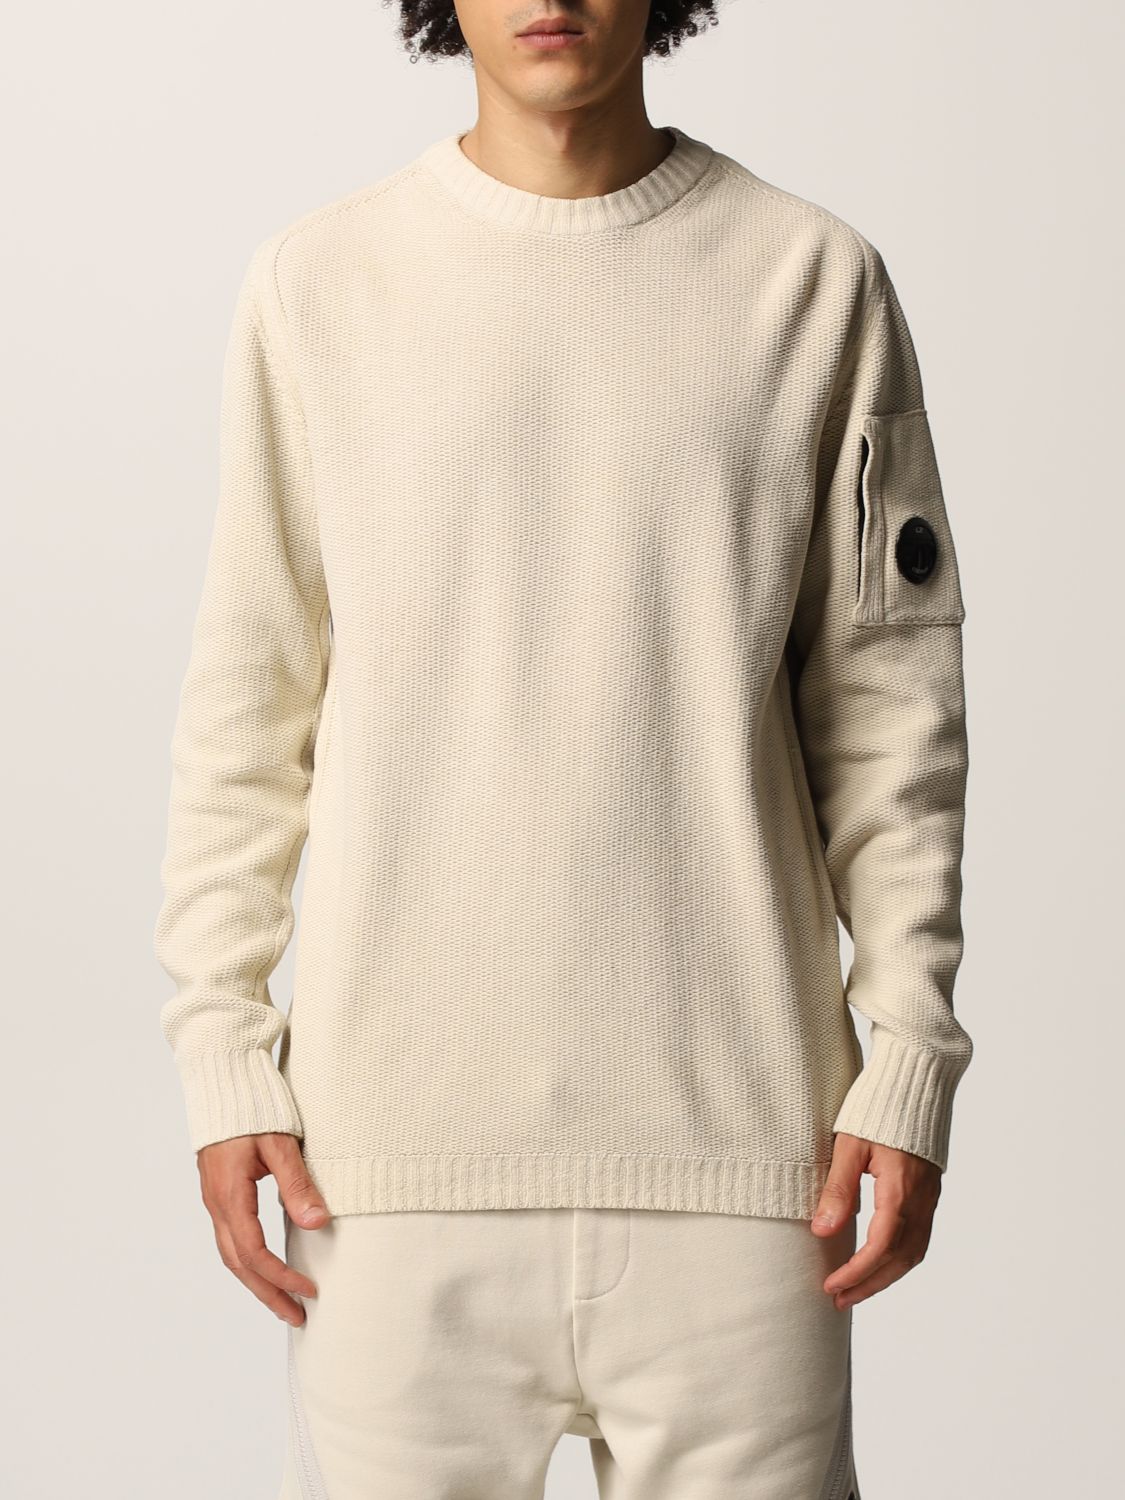 Streven viool Bekwaamheid C.P. COMPANY: sweater for man - White | C.p. Company sweater  11CMKN102A005558G online on GIGLIO.COM